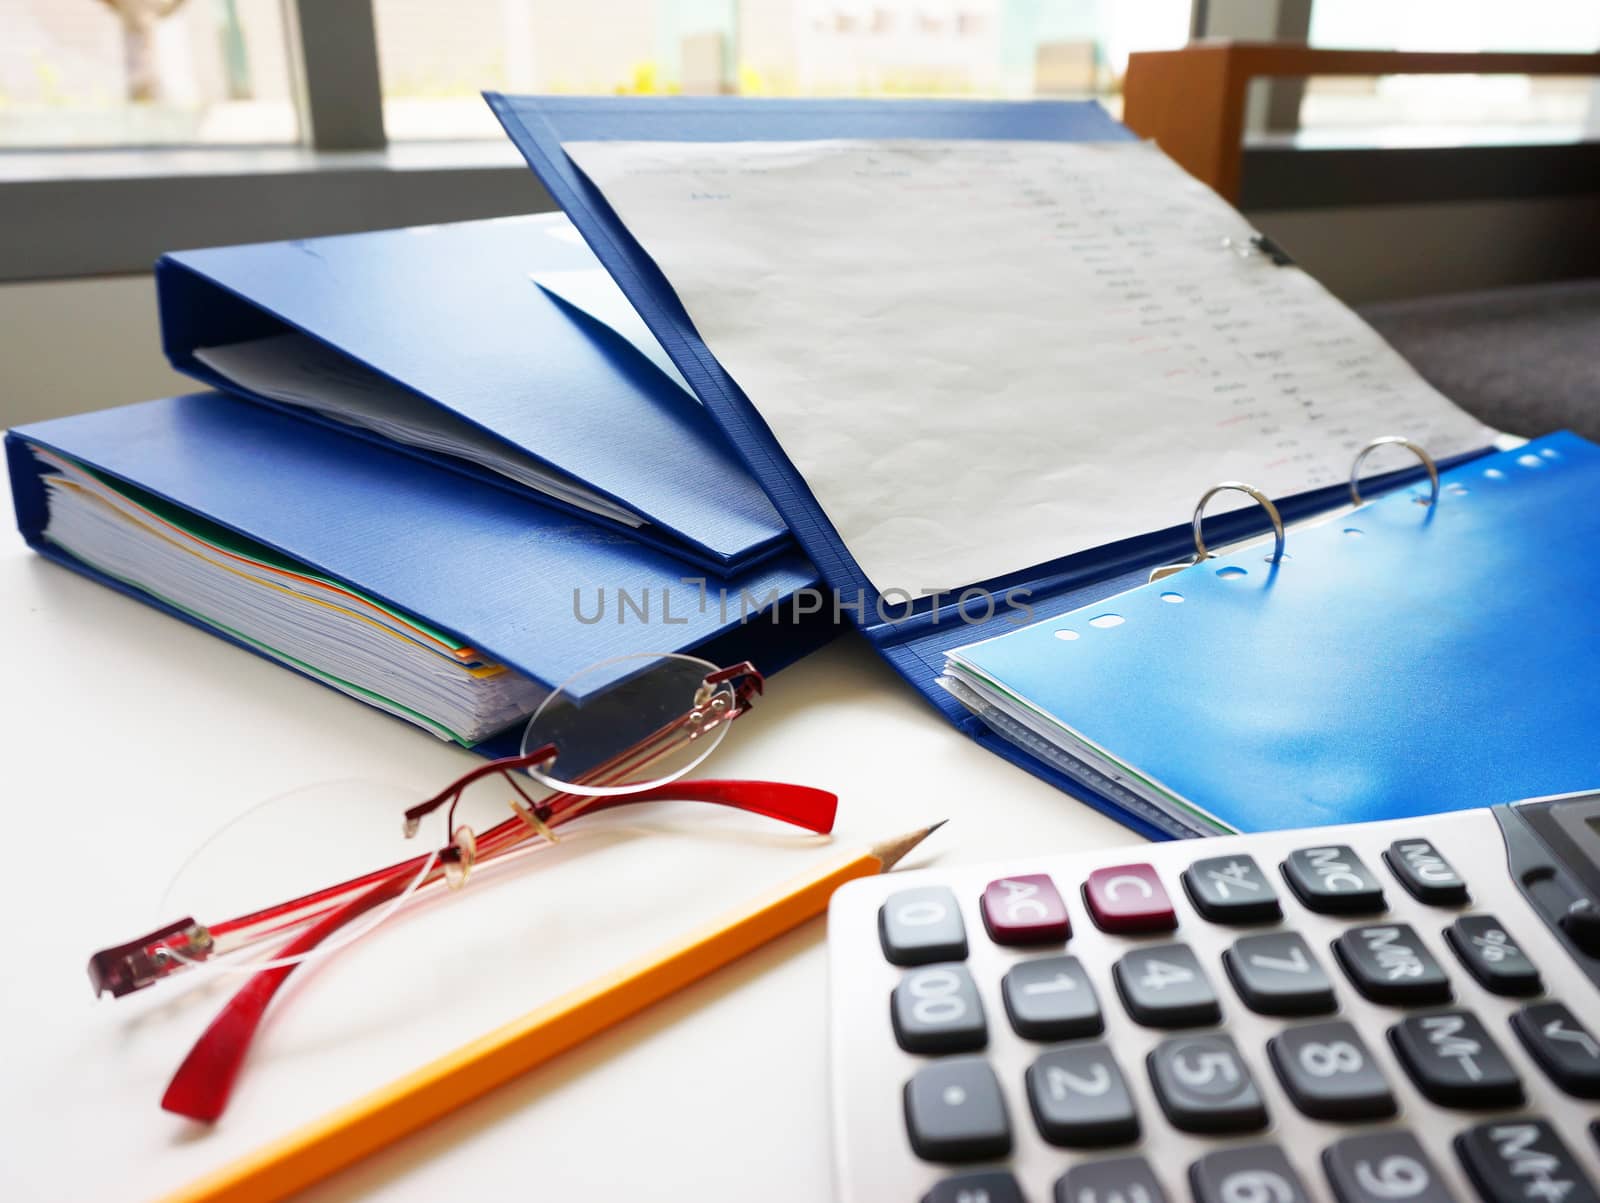 Blue folders and other office equipment, such as calculators, pencil and glasses, placed on the desk.                              